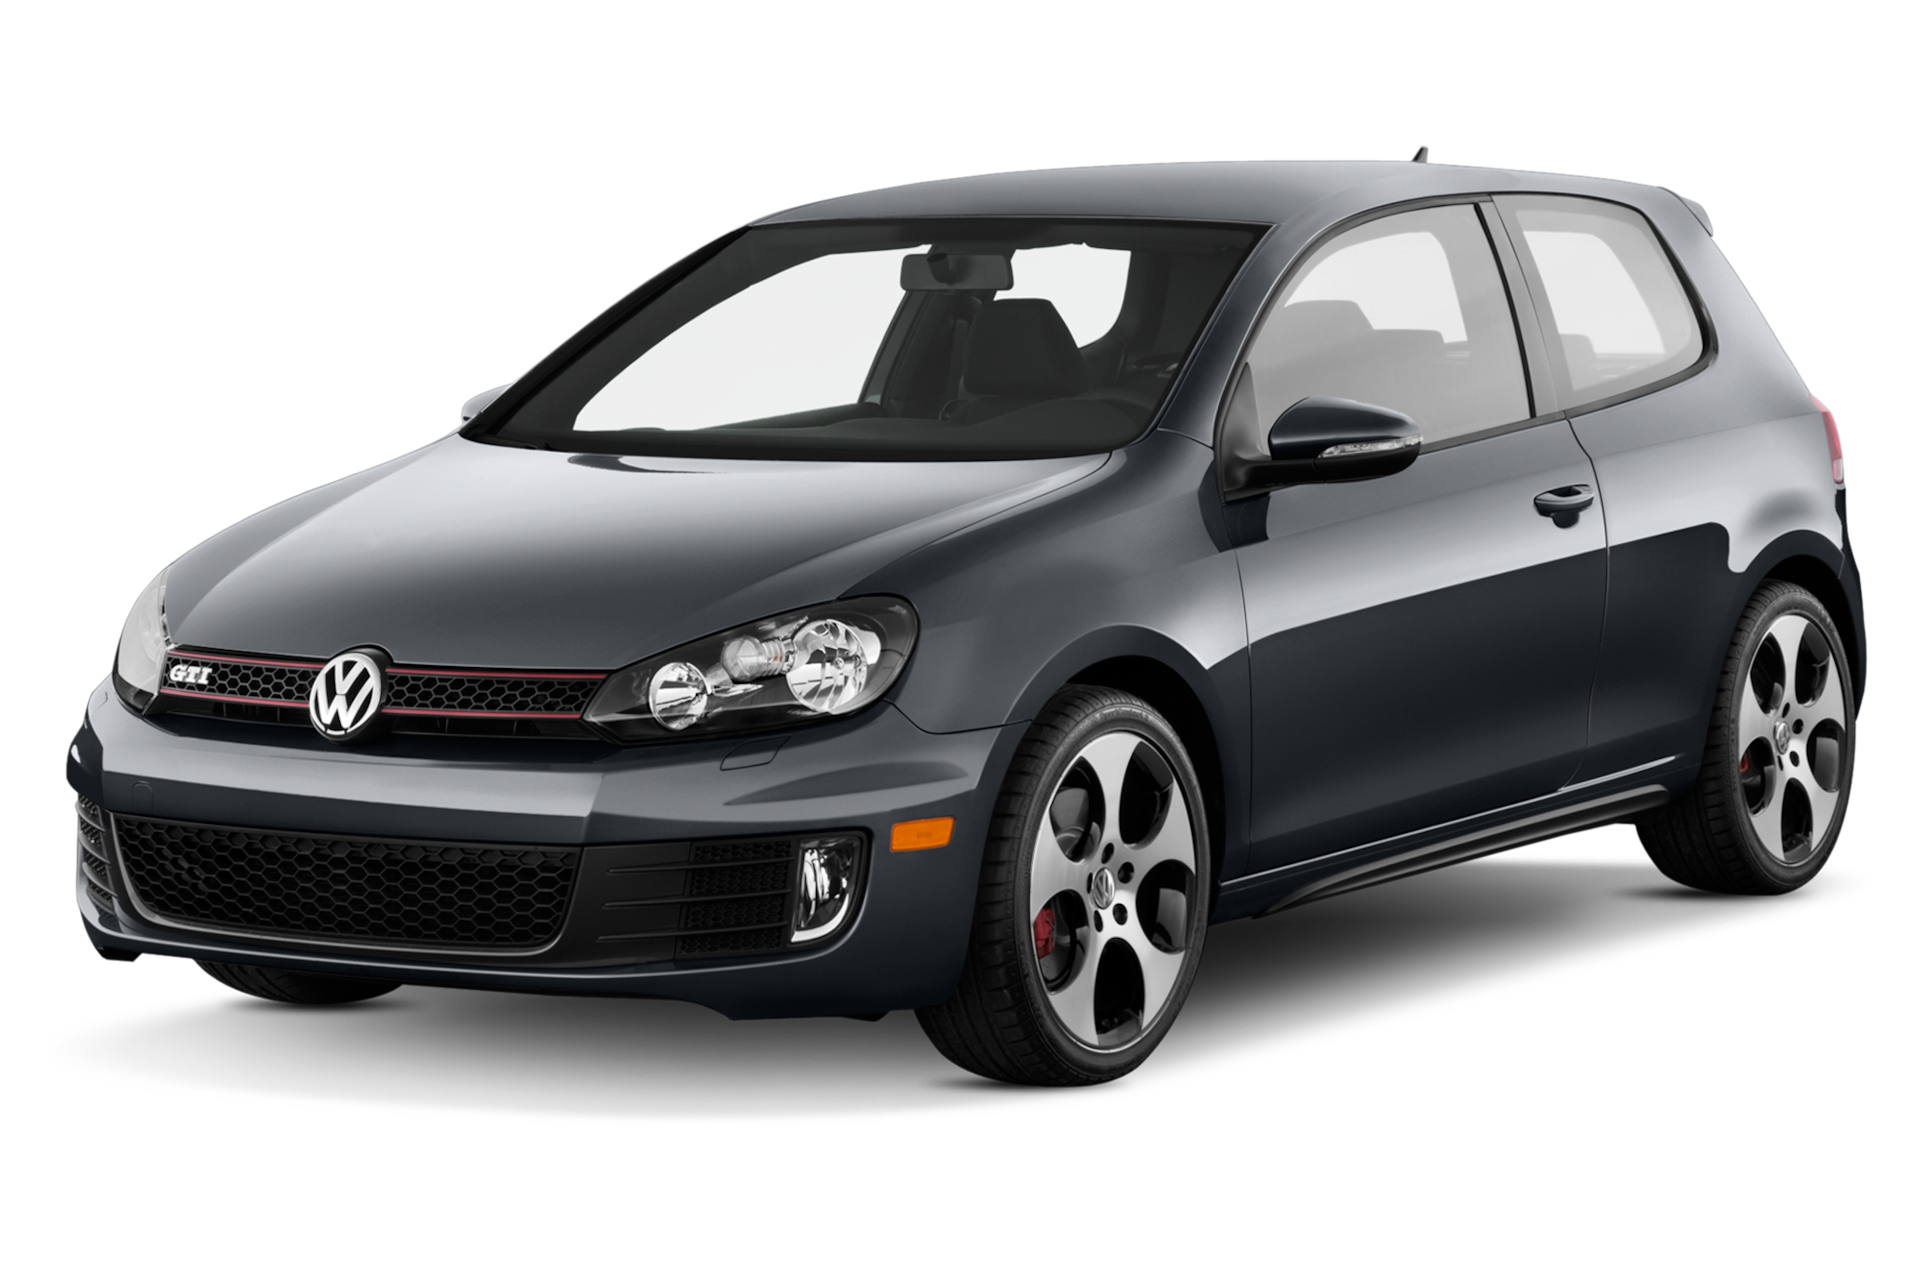 2010 Volkswagen GTI Prices, Reviews, and Photos - MotorTrend